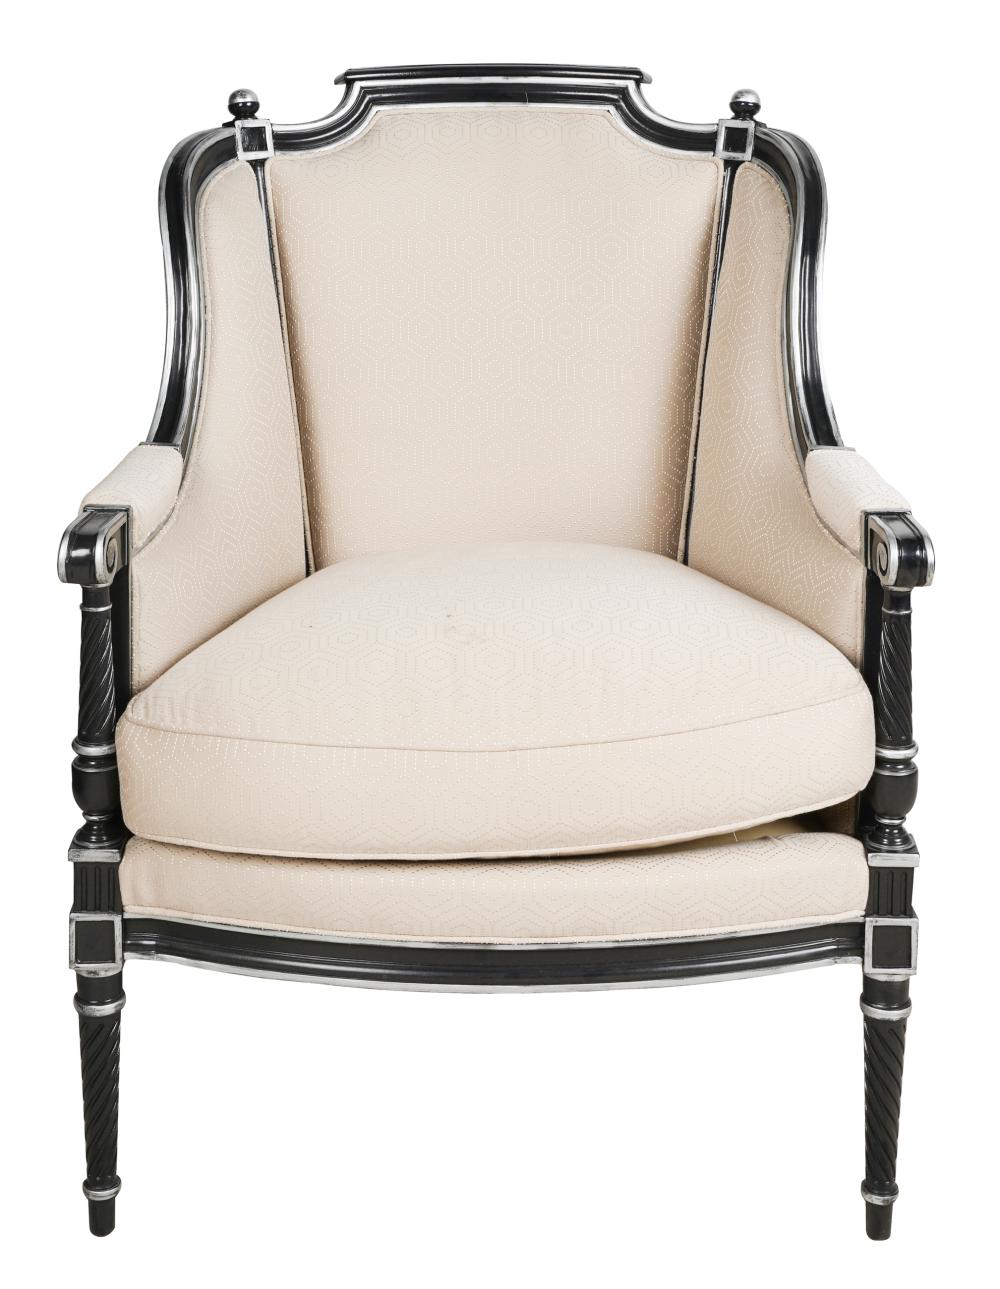 HICKORY CHAIR EBONIZED WOOD BERGEREwith 32fba8